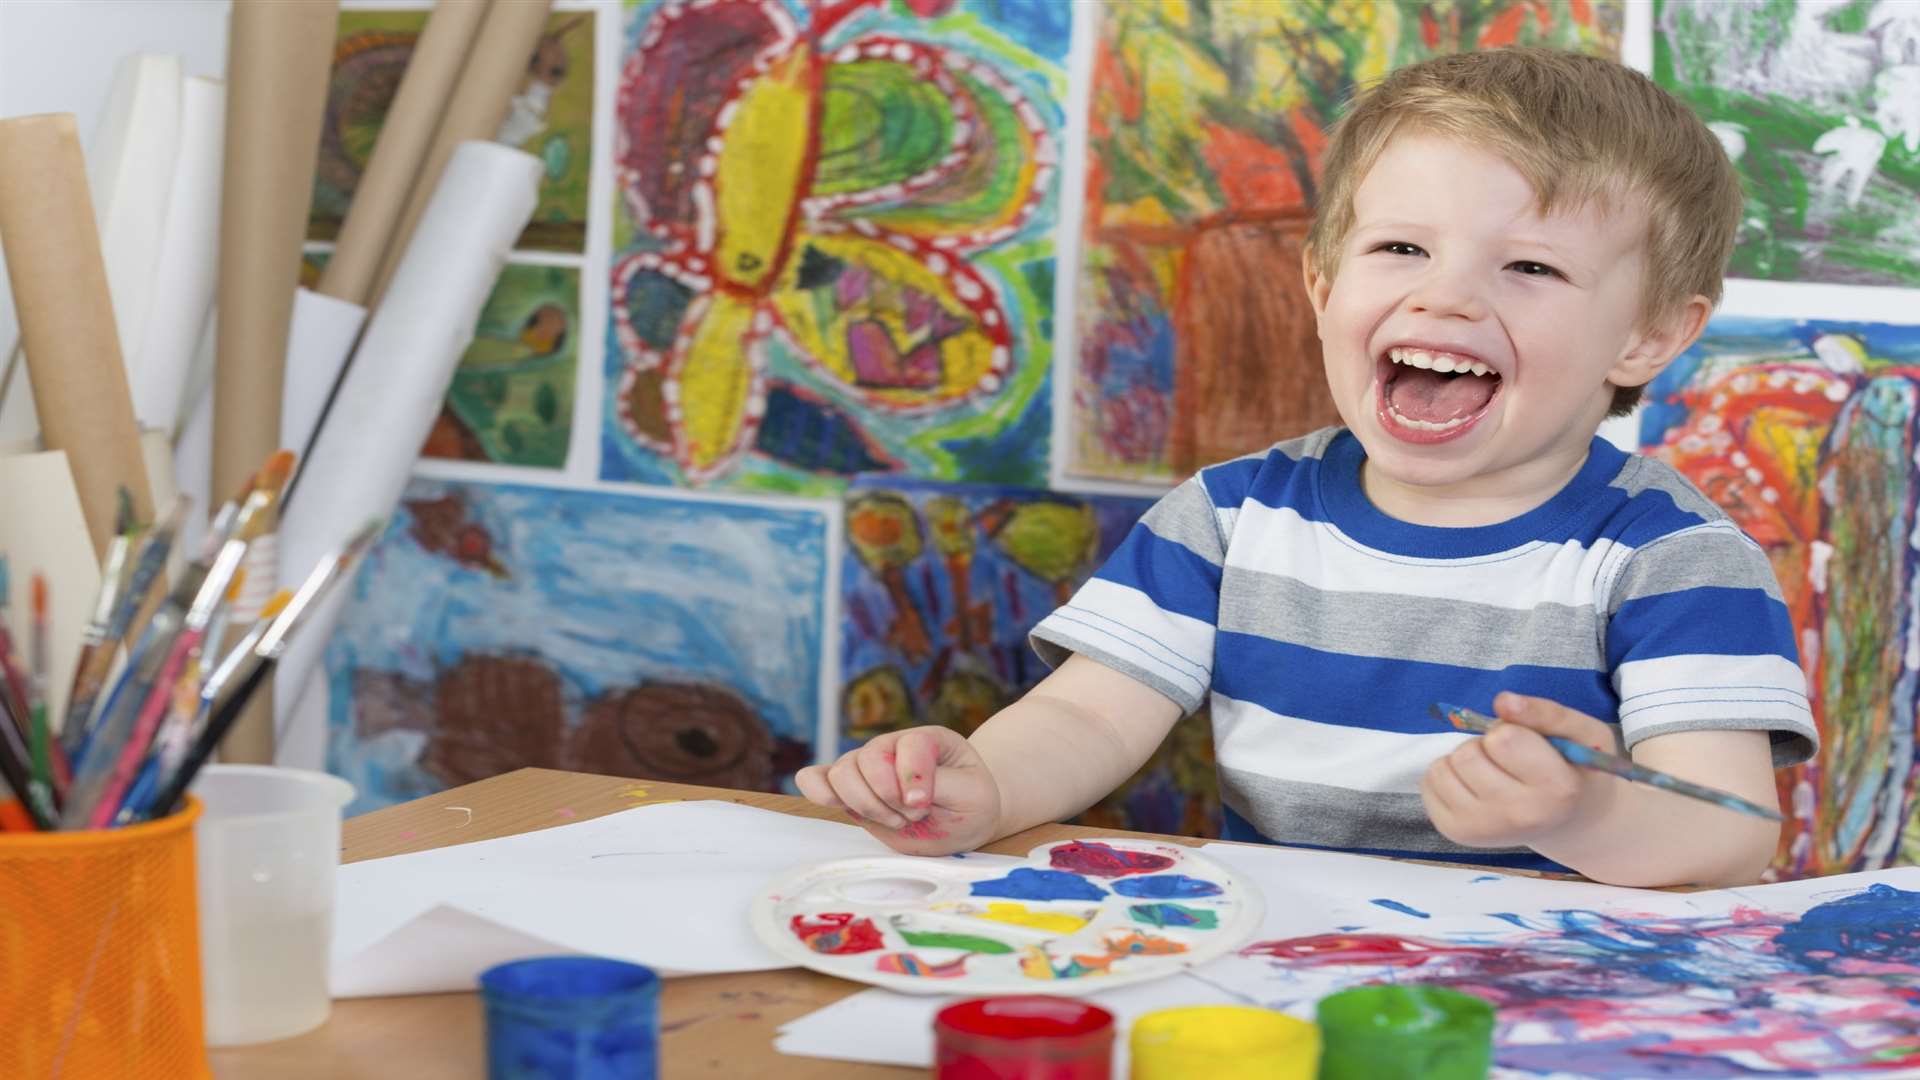 Springles Nursery looks after children aged three months to school age